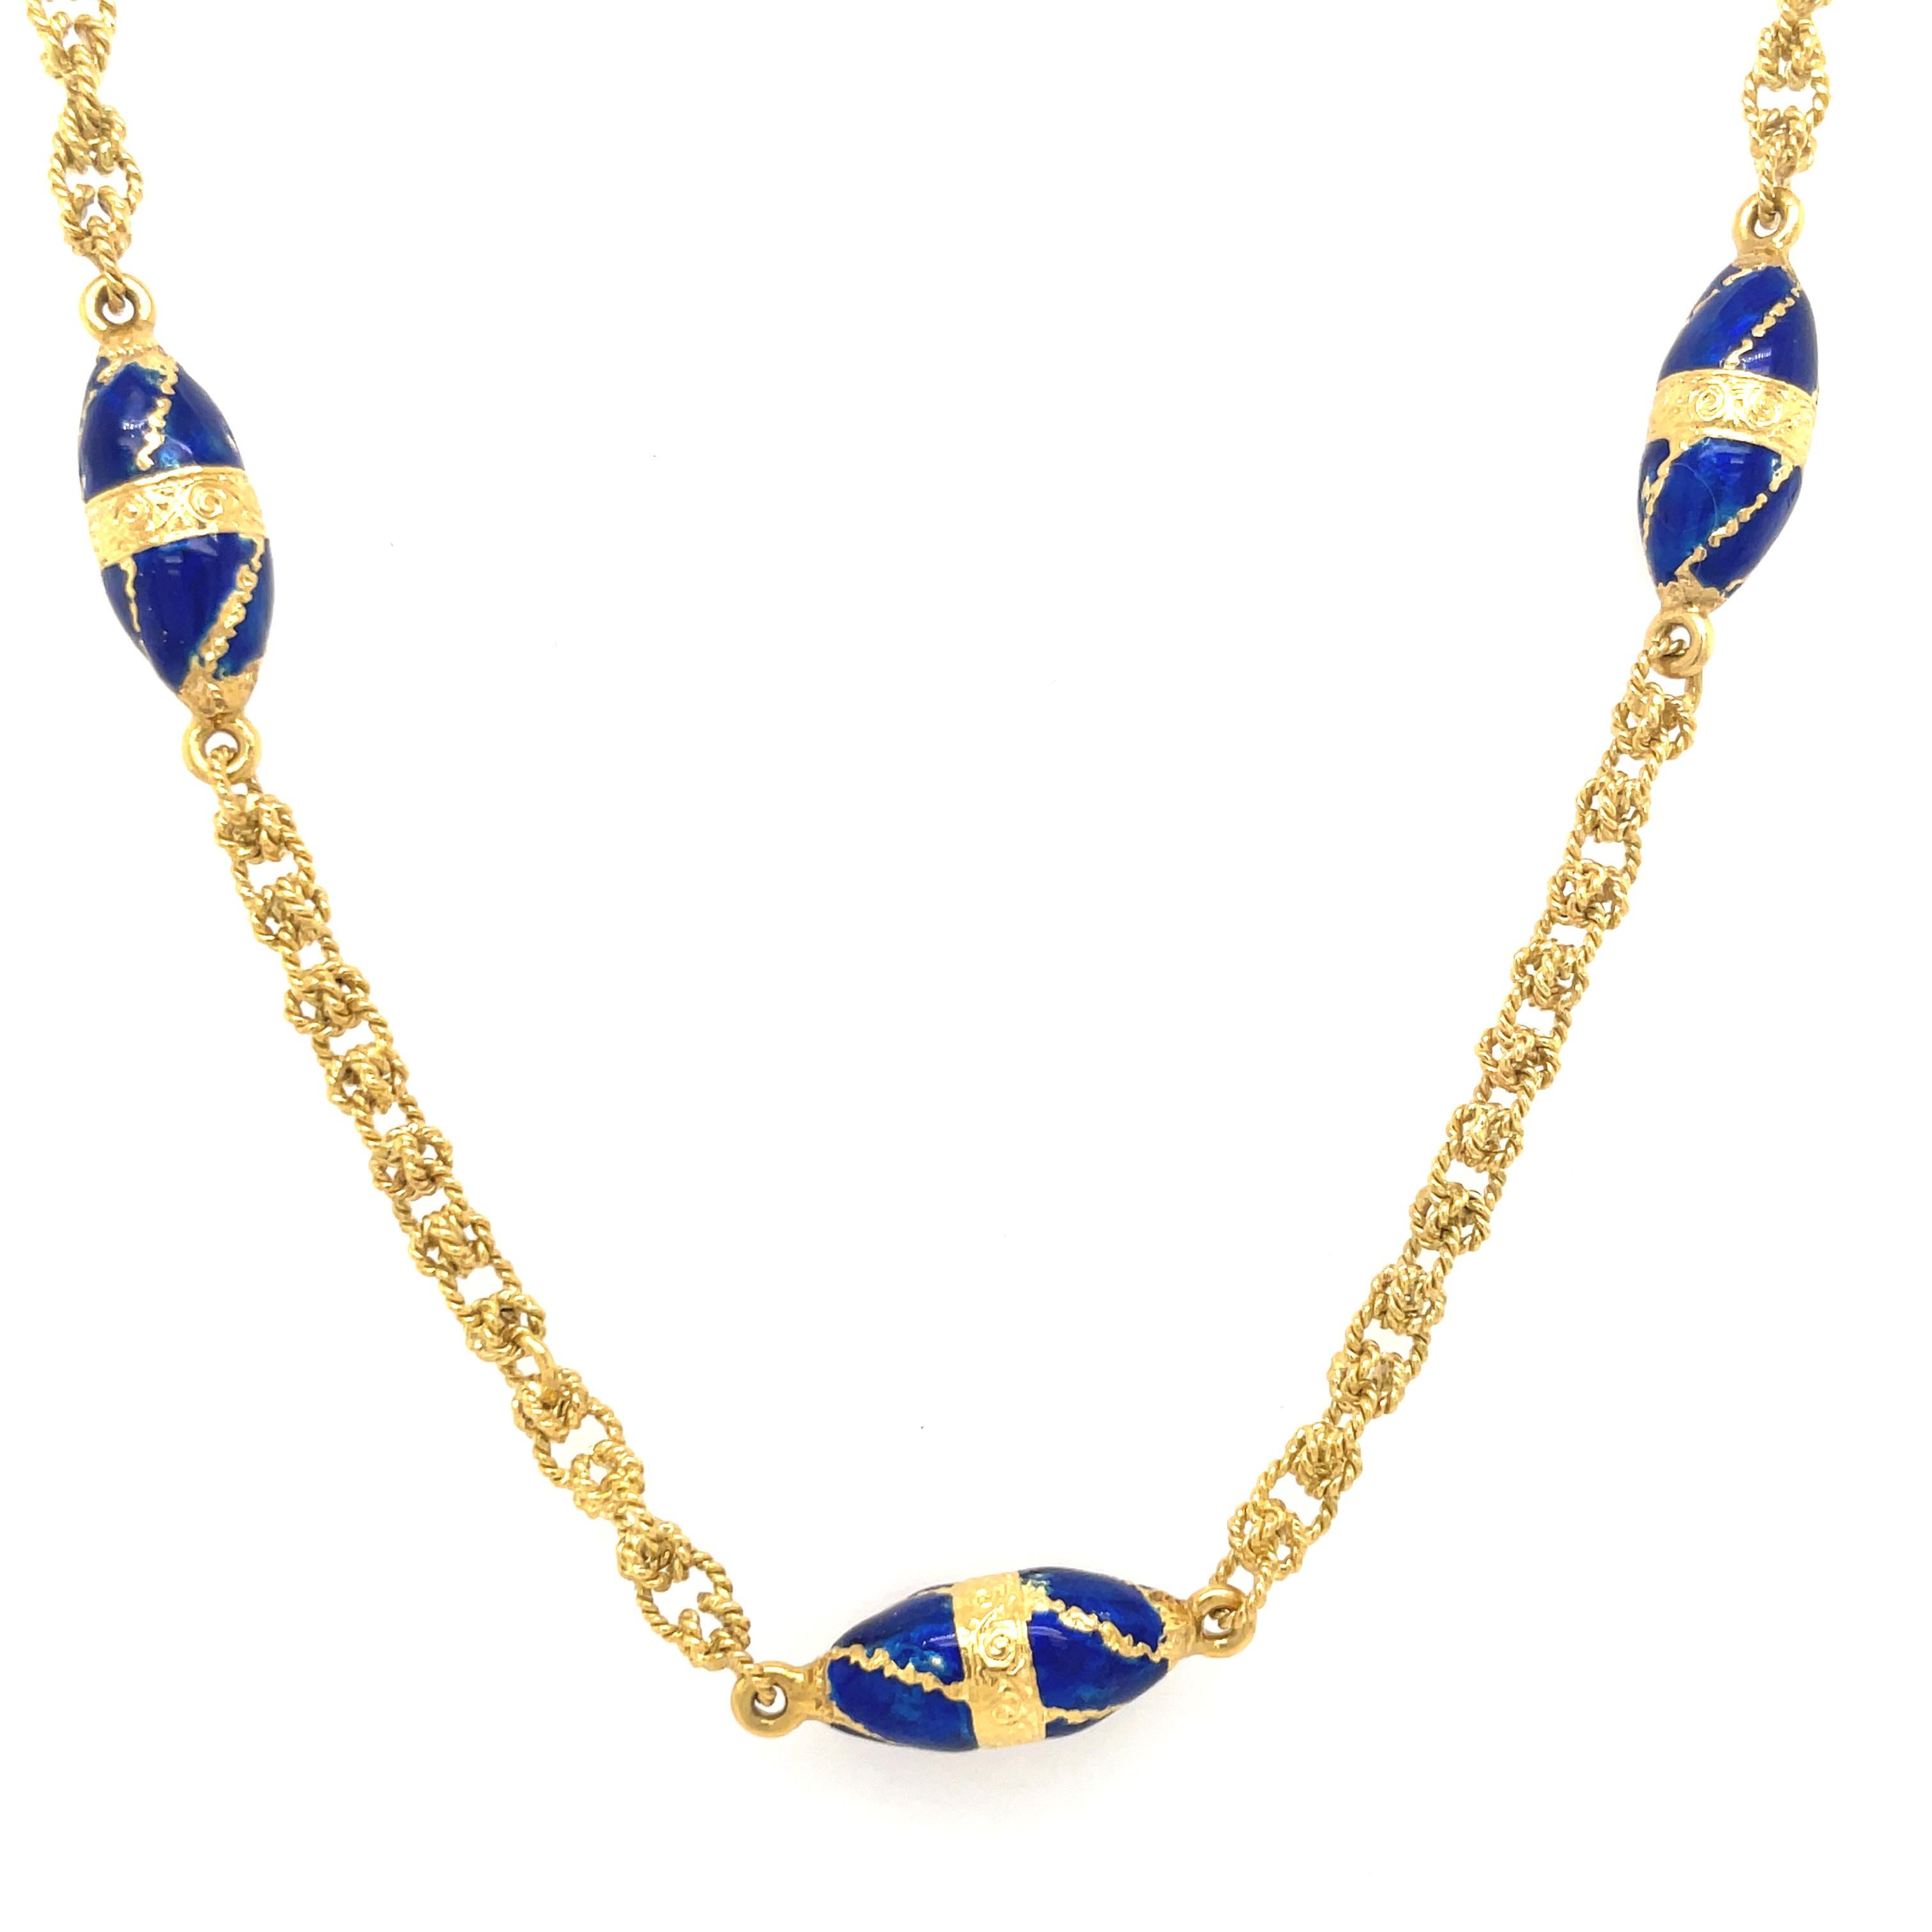 Absolute gorgeous one-of-a-kind chain. Heavy gauge 18K yellow gold.  Intricate, well-detailed openwork chain.  Set with twelve brilliant cobalt blue stations.  34 1/2